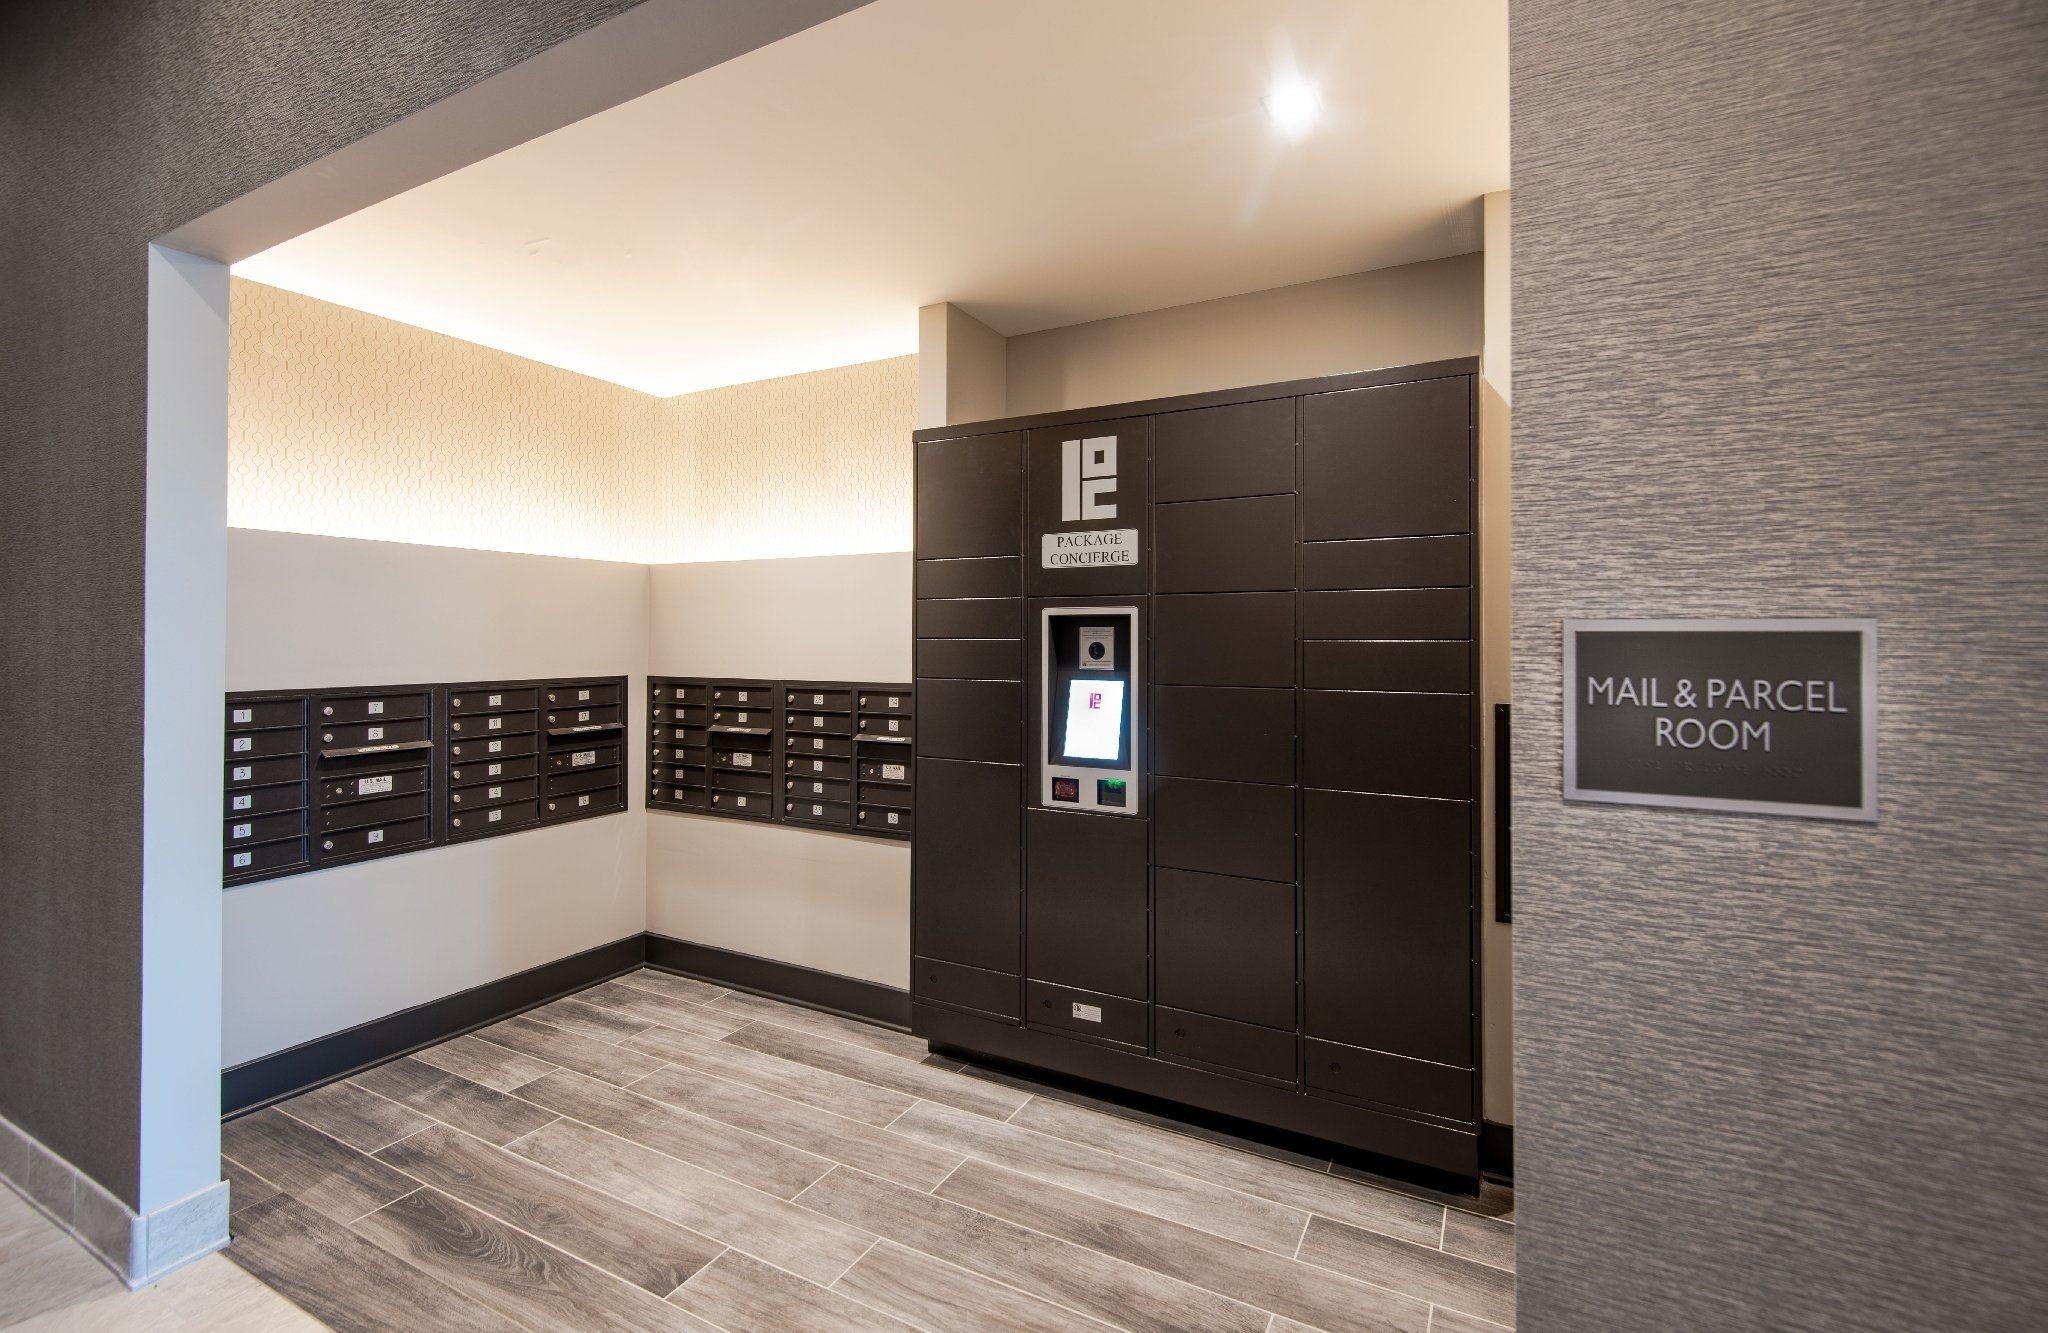 A mail & parcel room with an electronic parcel locker system in black and gray from Package Concierge®